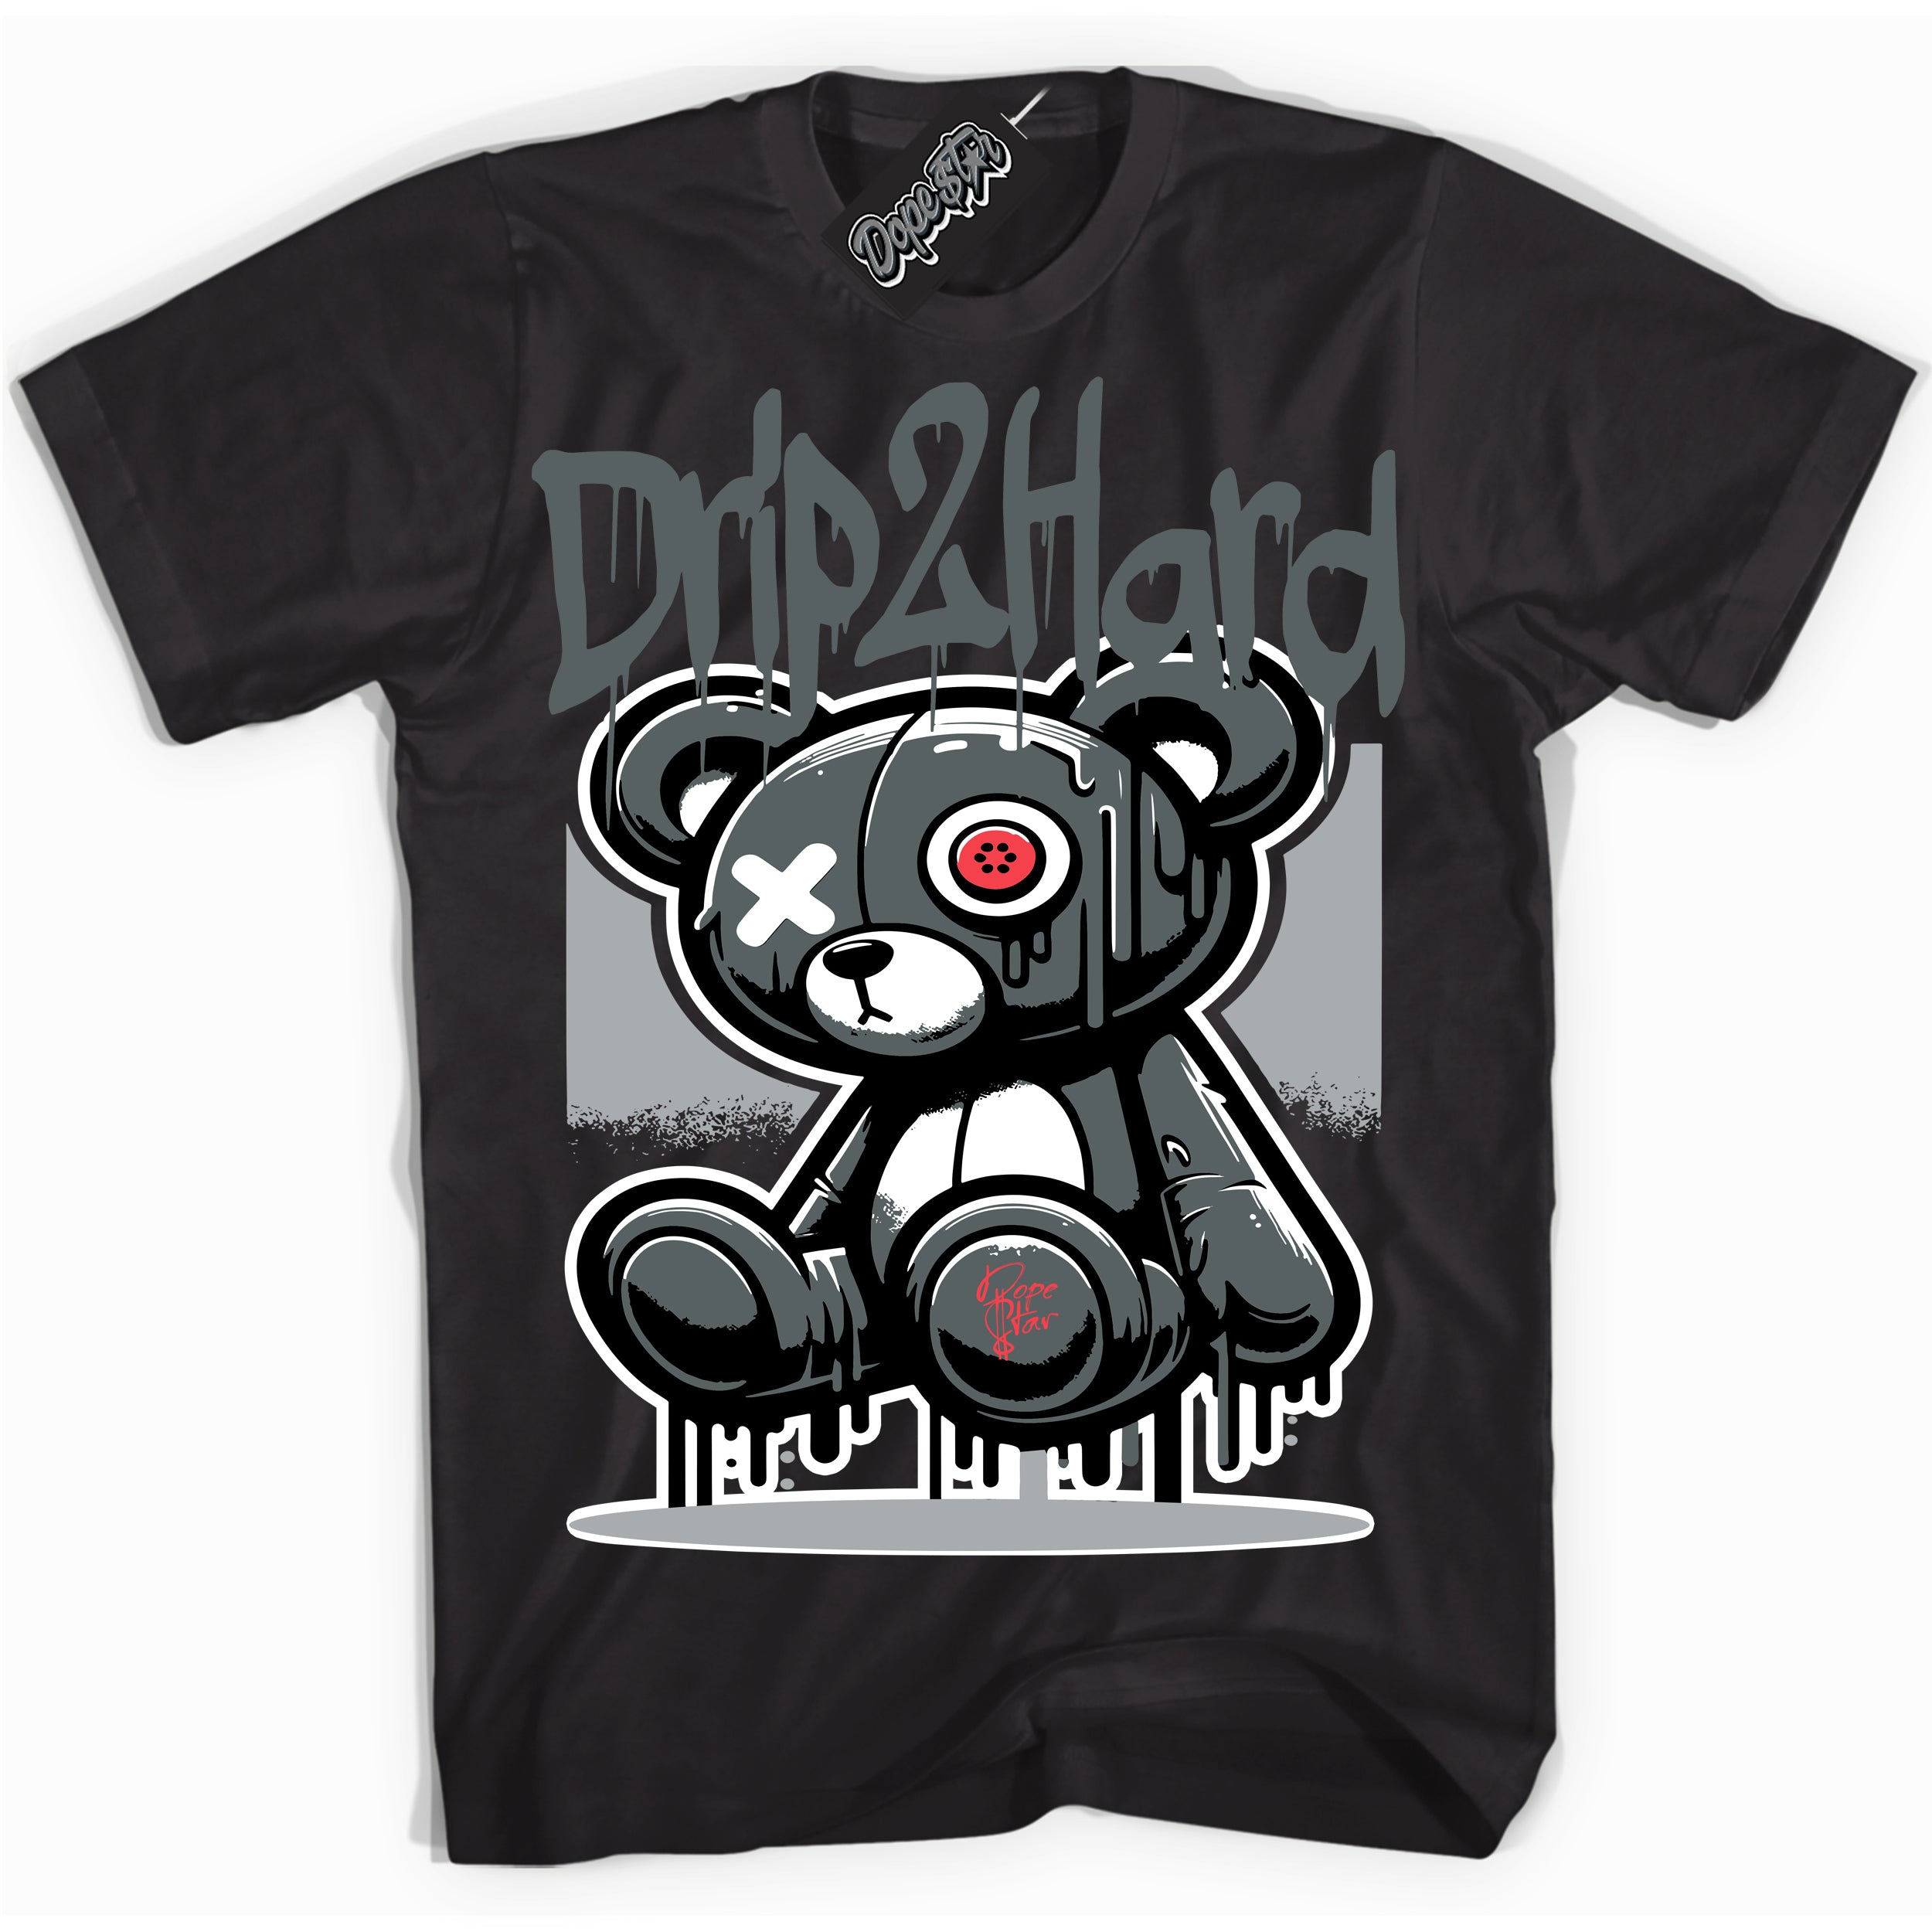 Cool Black graphic tee with “ Drip 2 Hard ” design, that perfectly matches Infrared 4s